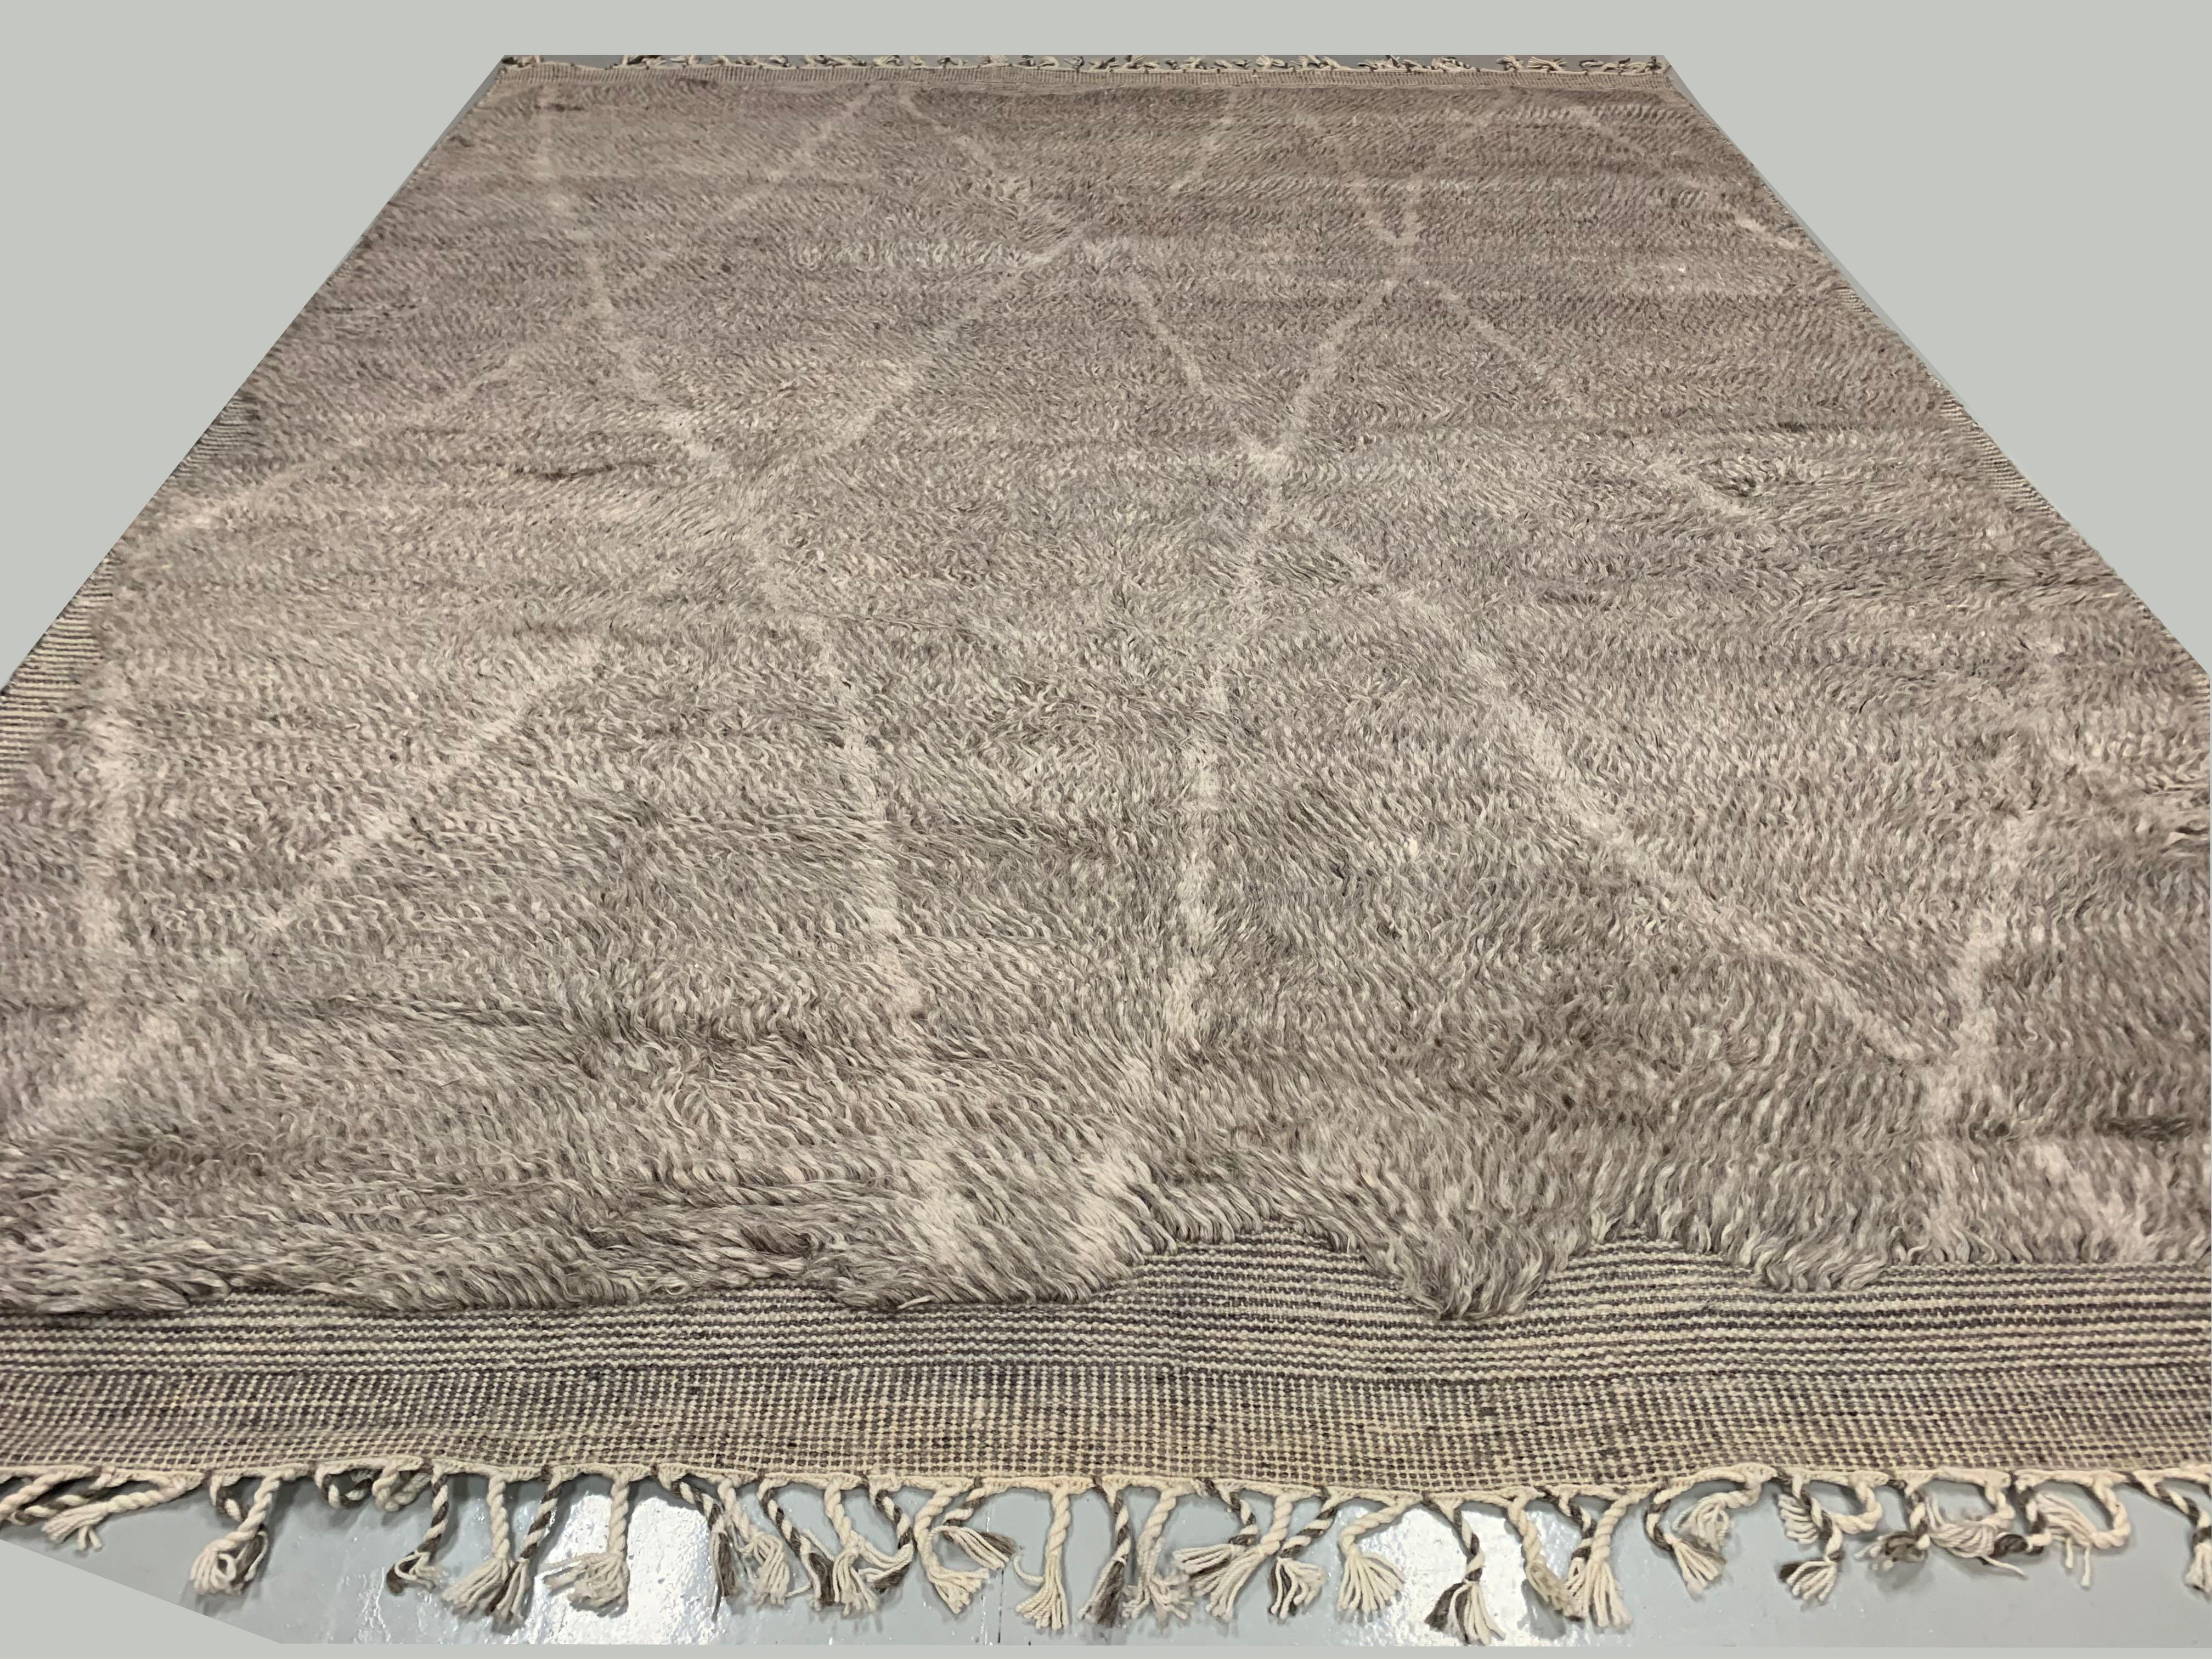 Moroccan Style Fluffy Collection rug. Measures: 10'1 x 13'11. Using the finest of wools these handwoven recreations of Moroccan Classic designs bring a feeling of warmth and luxury to any setting. Colors: gray/ivory.